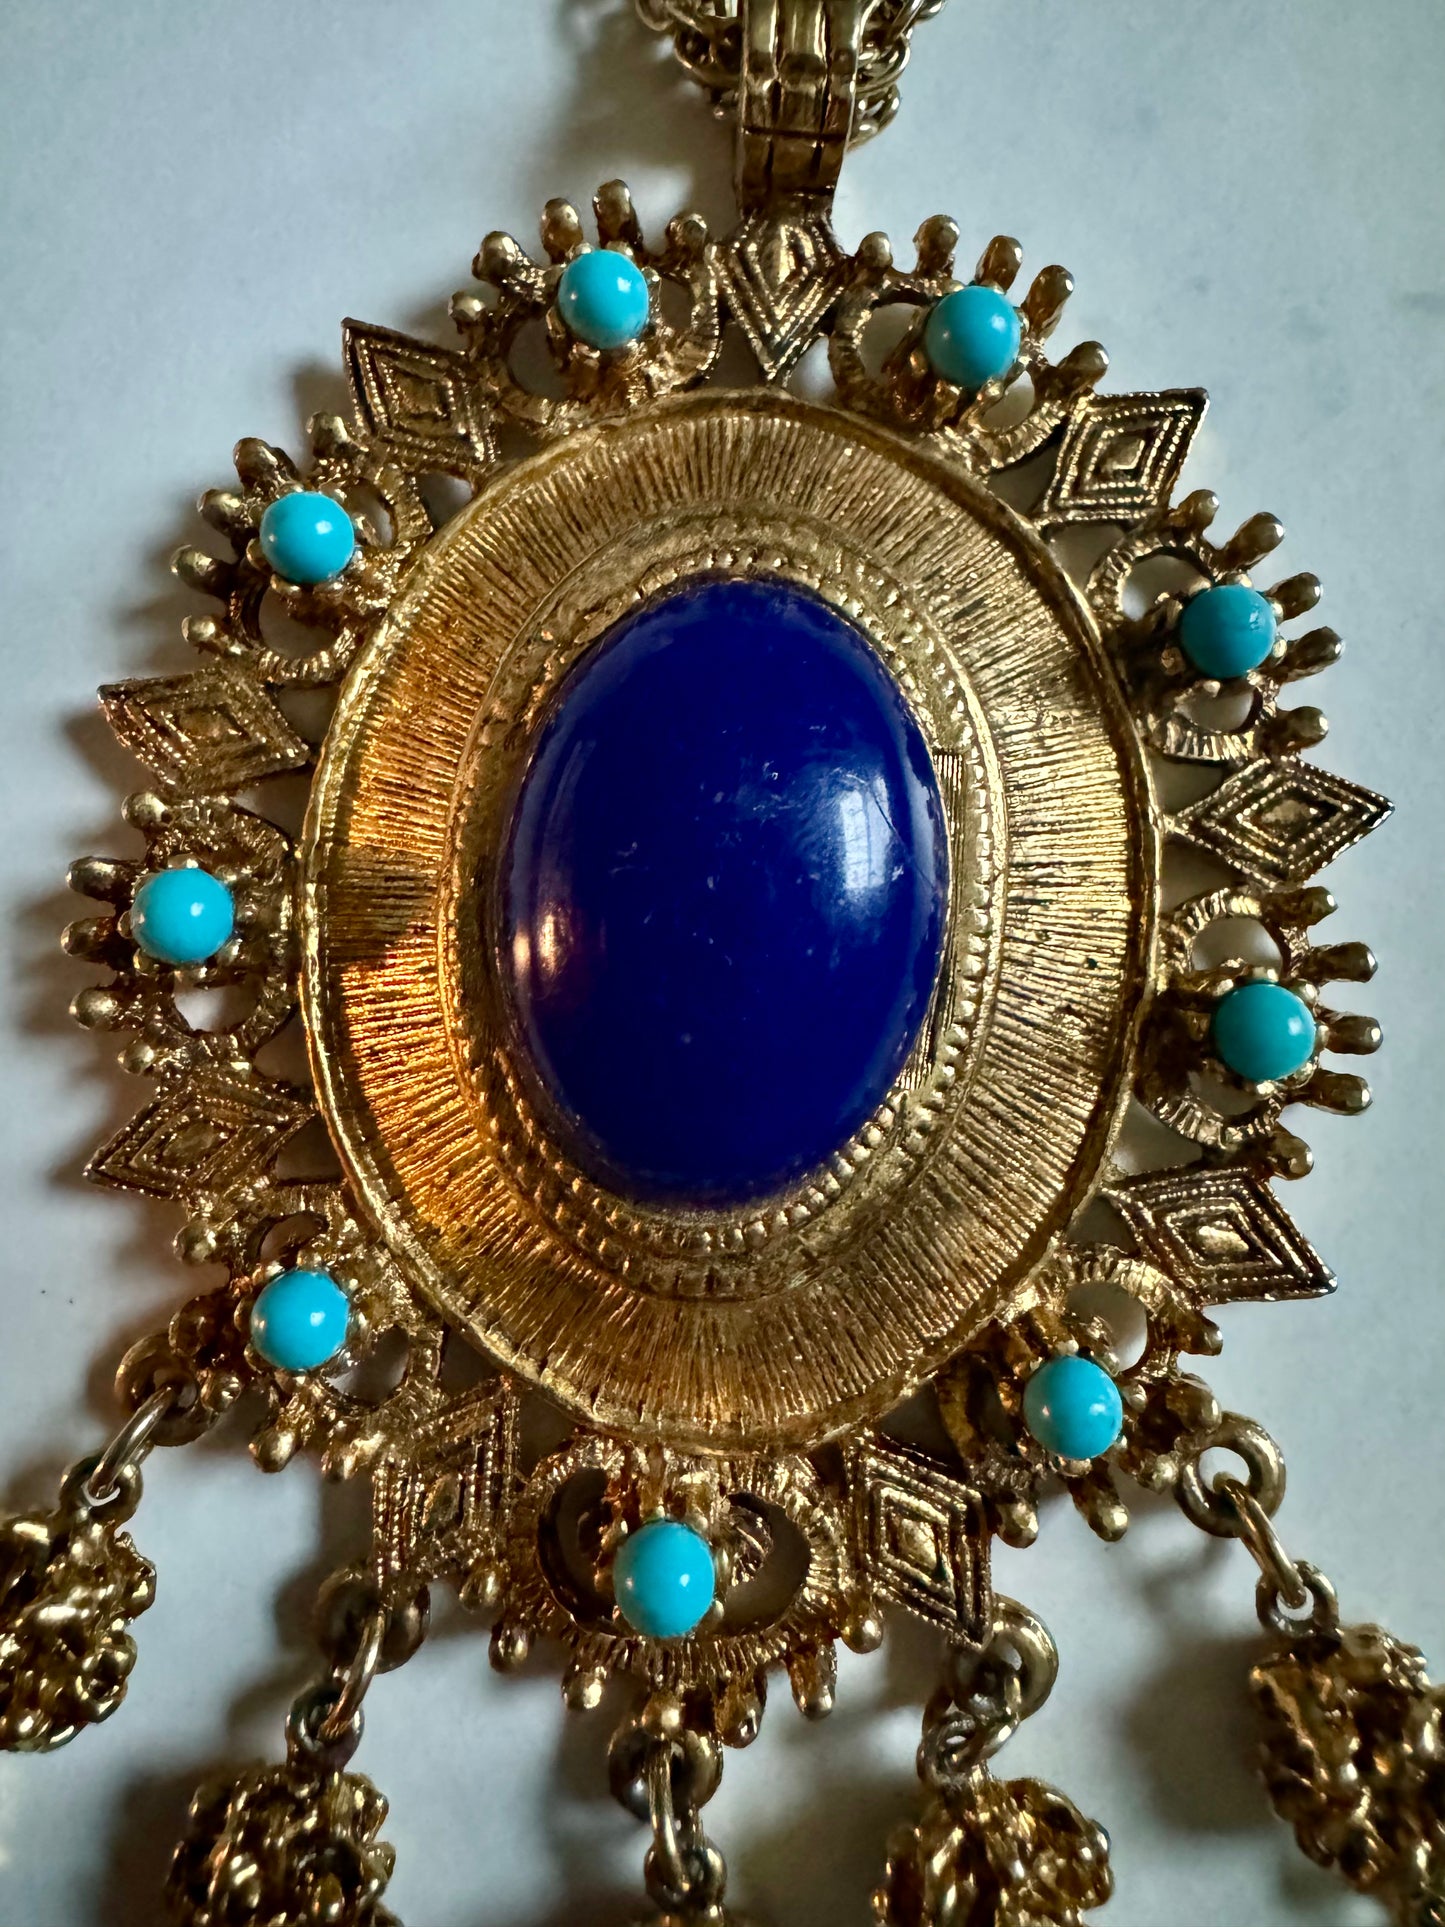 Stunning vintage gold tone necklace with turquoise and blue pendant.